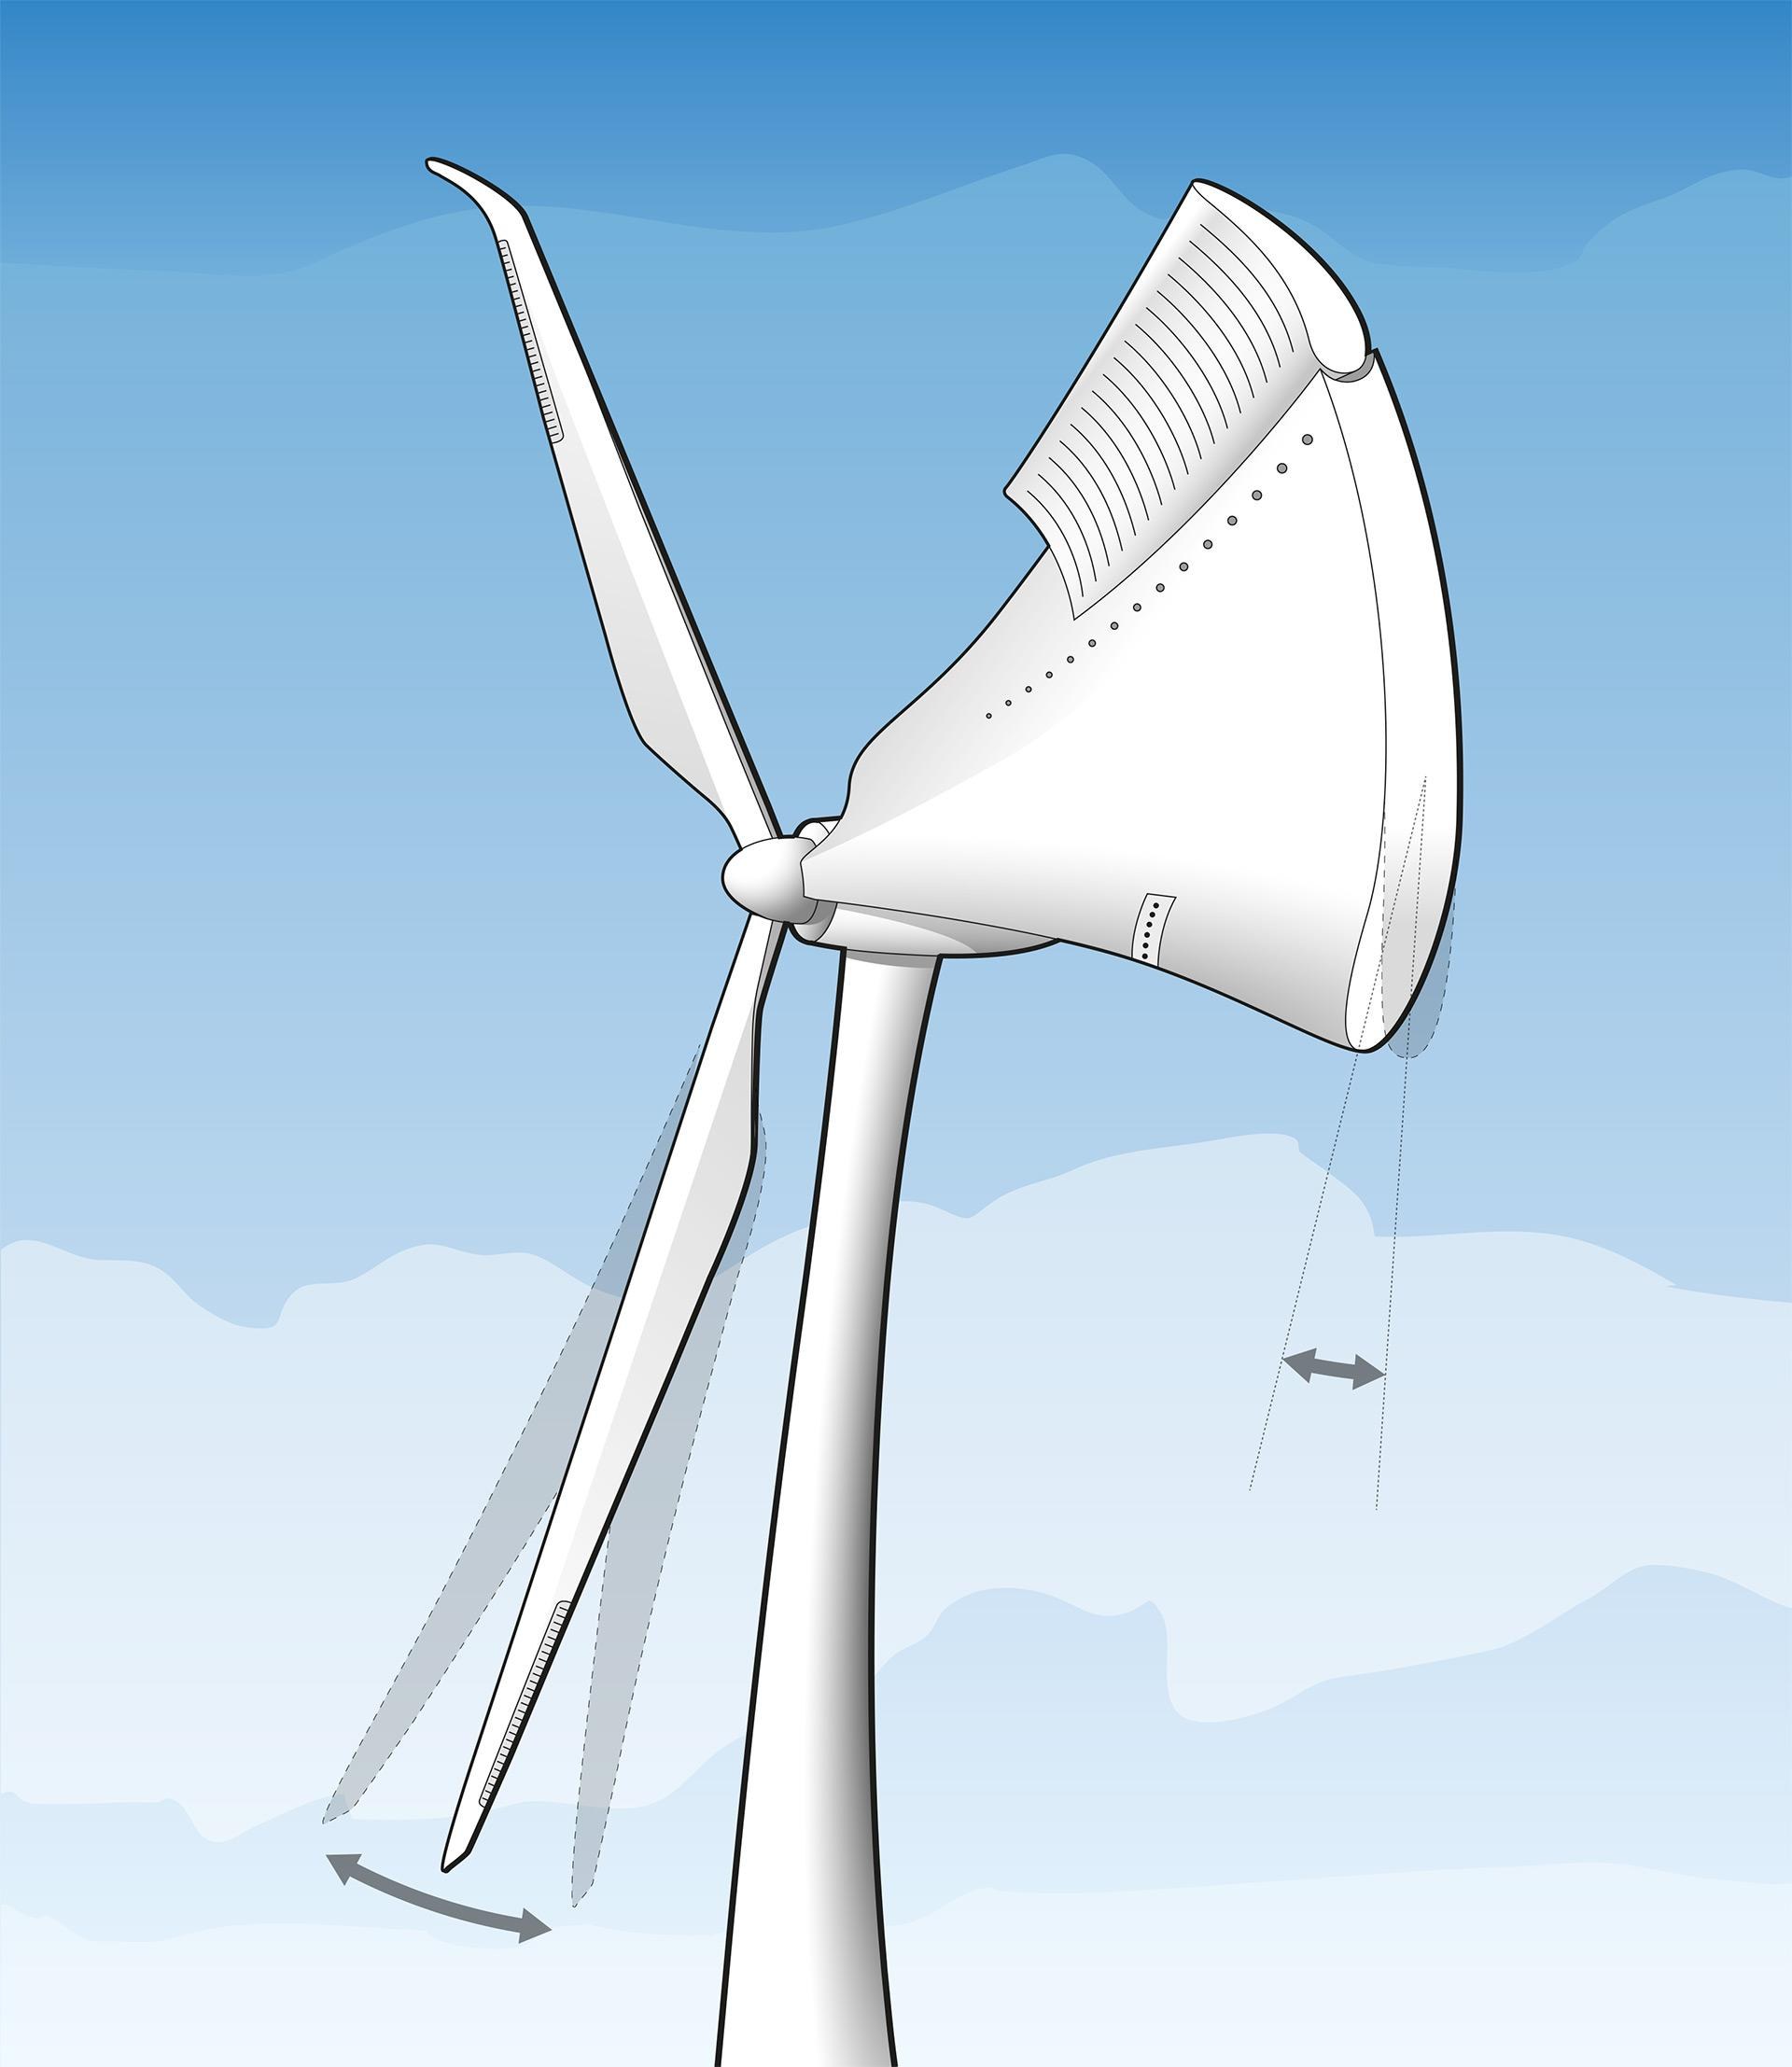 Smart Blades – intelligent rotor blades to increase wind farm output